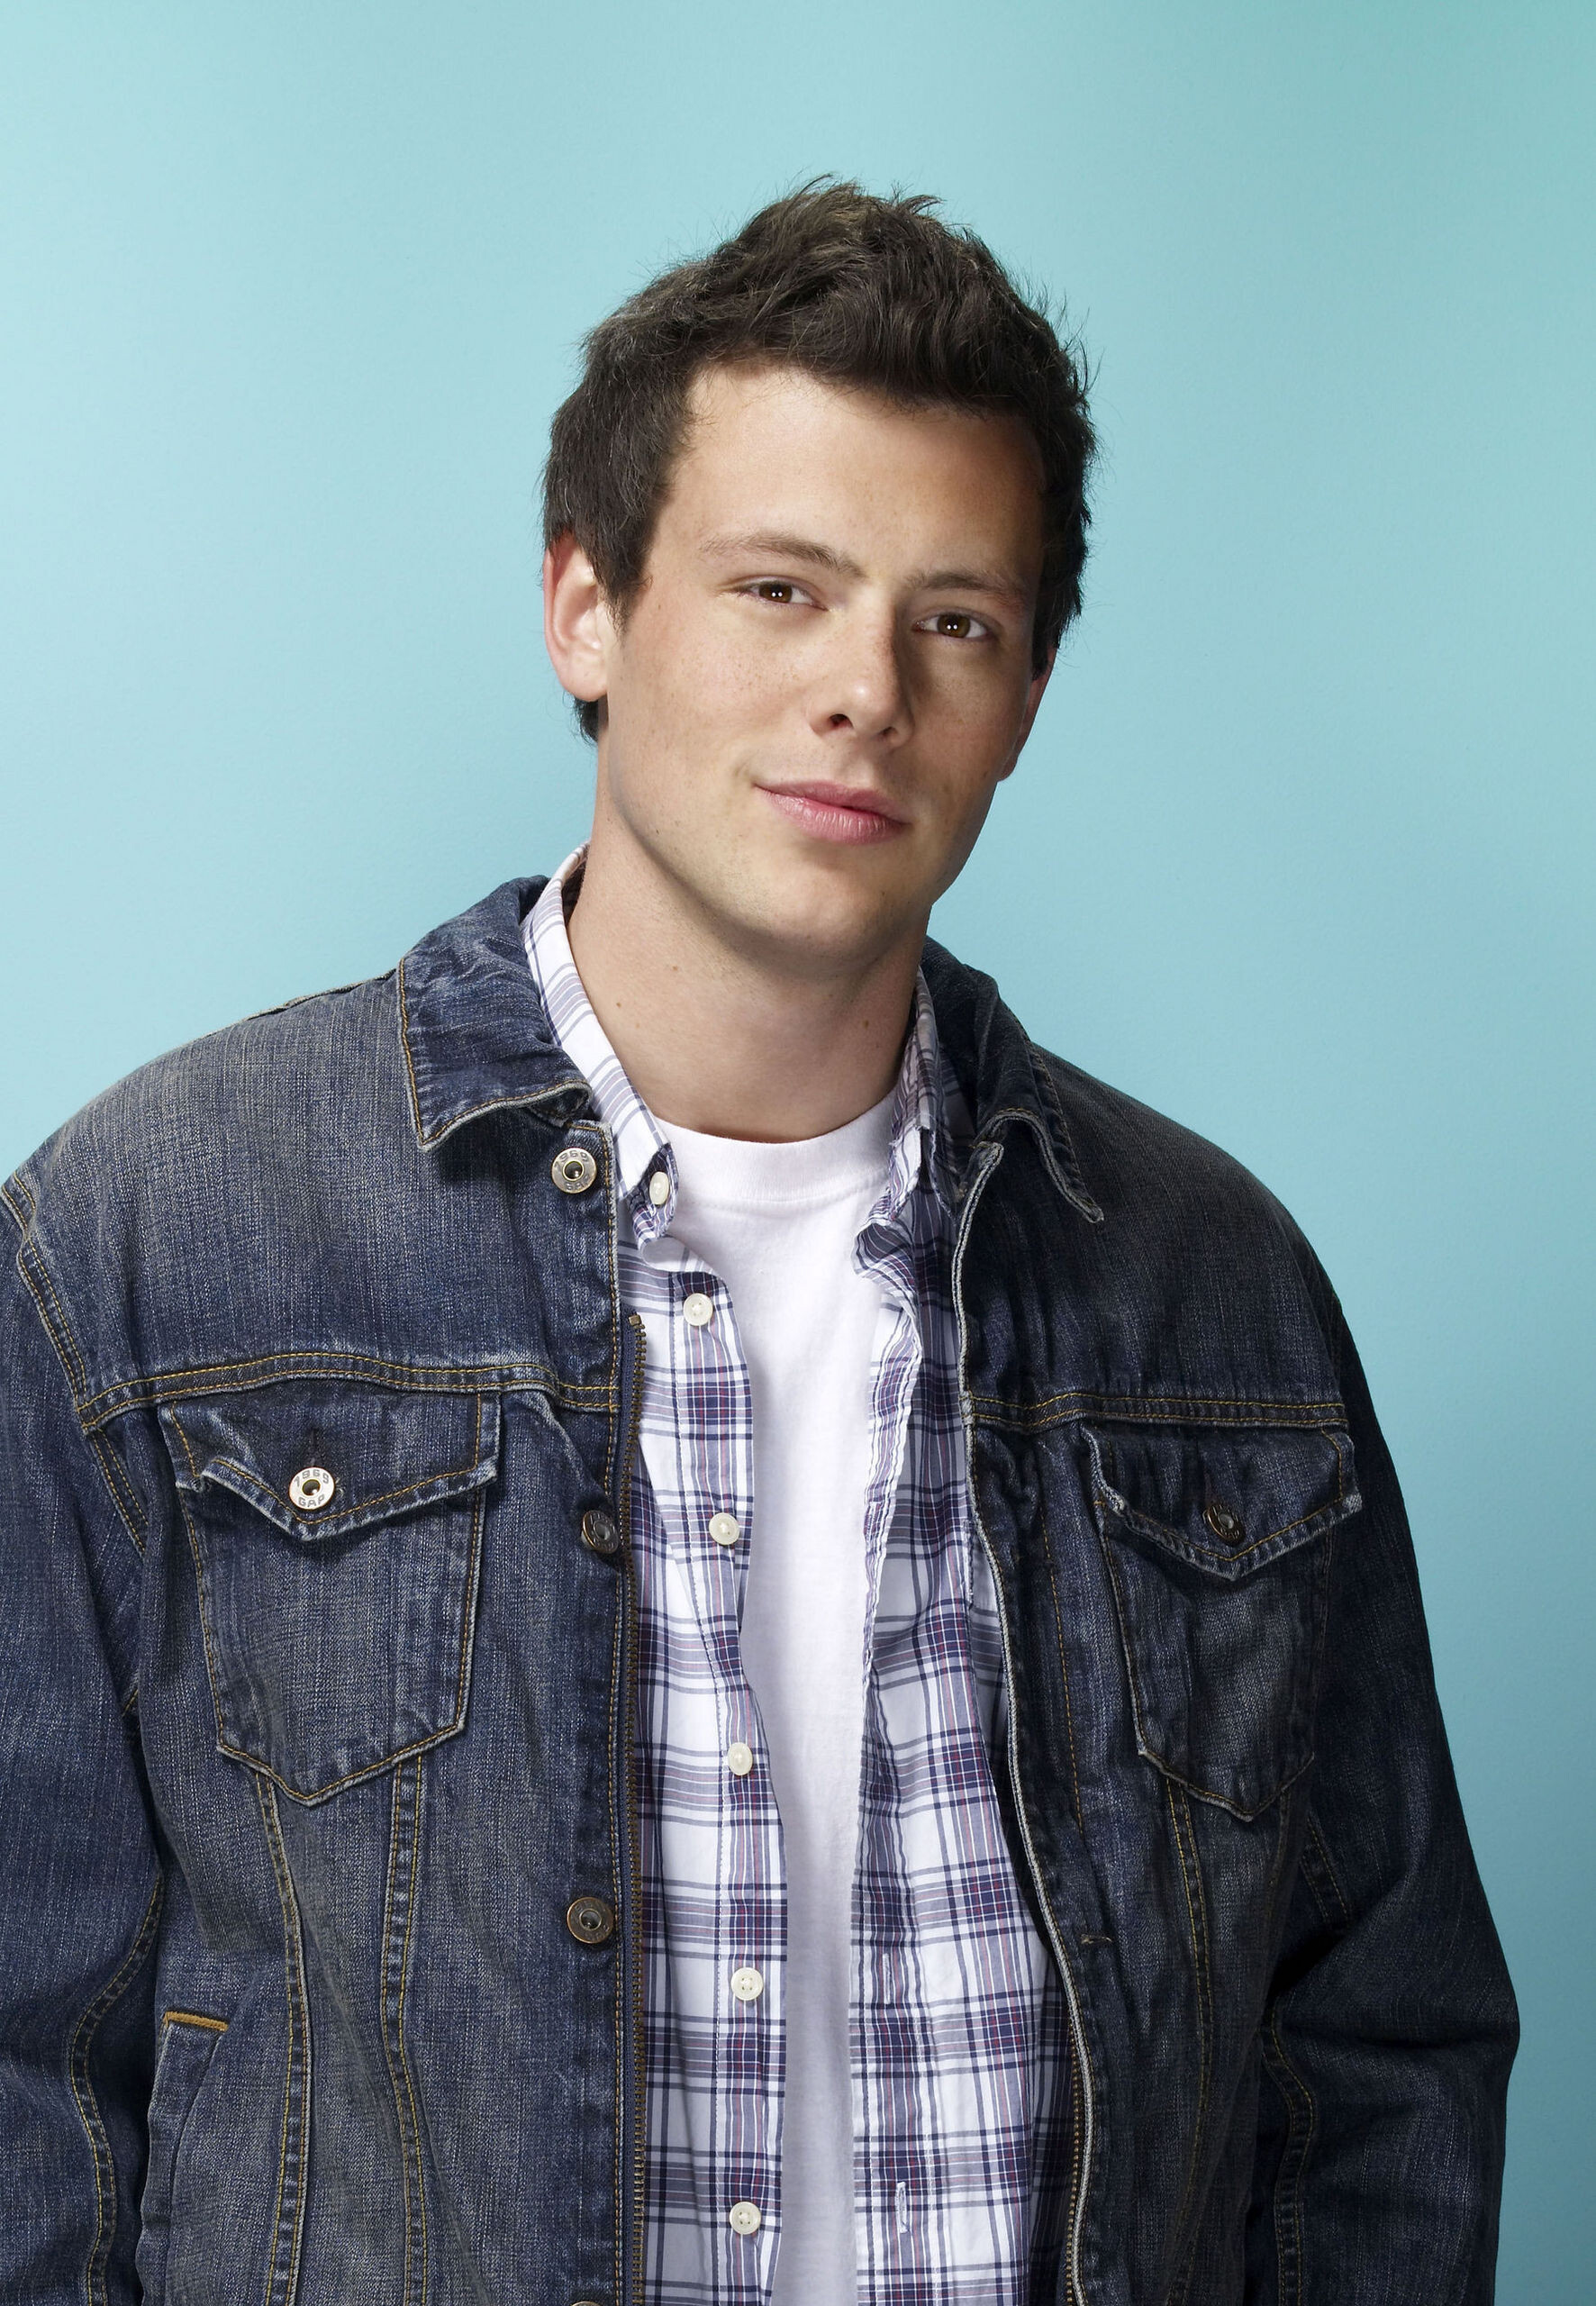 Glee (TV series): Finn Christopher Hudson, A character that blackmailed into joining the school glee club. 1780x2560 HD Background.